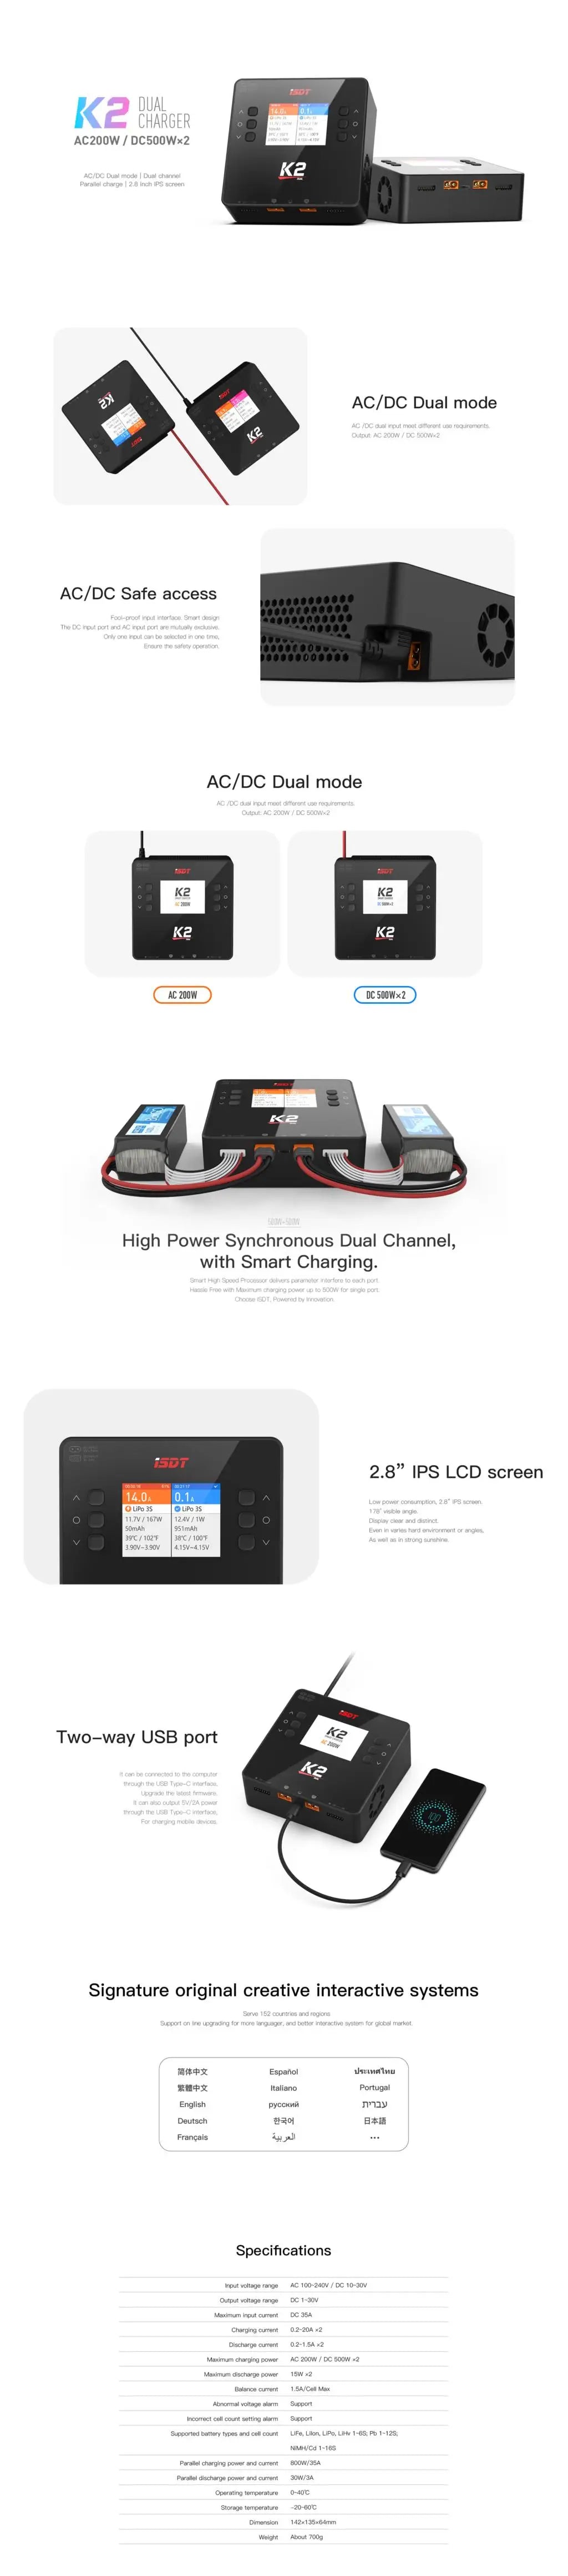 ISDT K2 Charger, Kz AC 200W DC SOOWx High Power Synchronous Dual Channel, with Smart